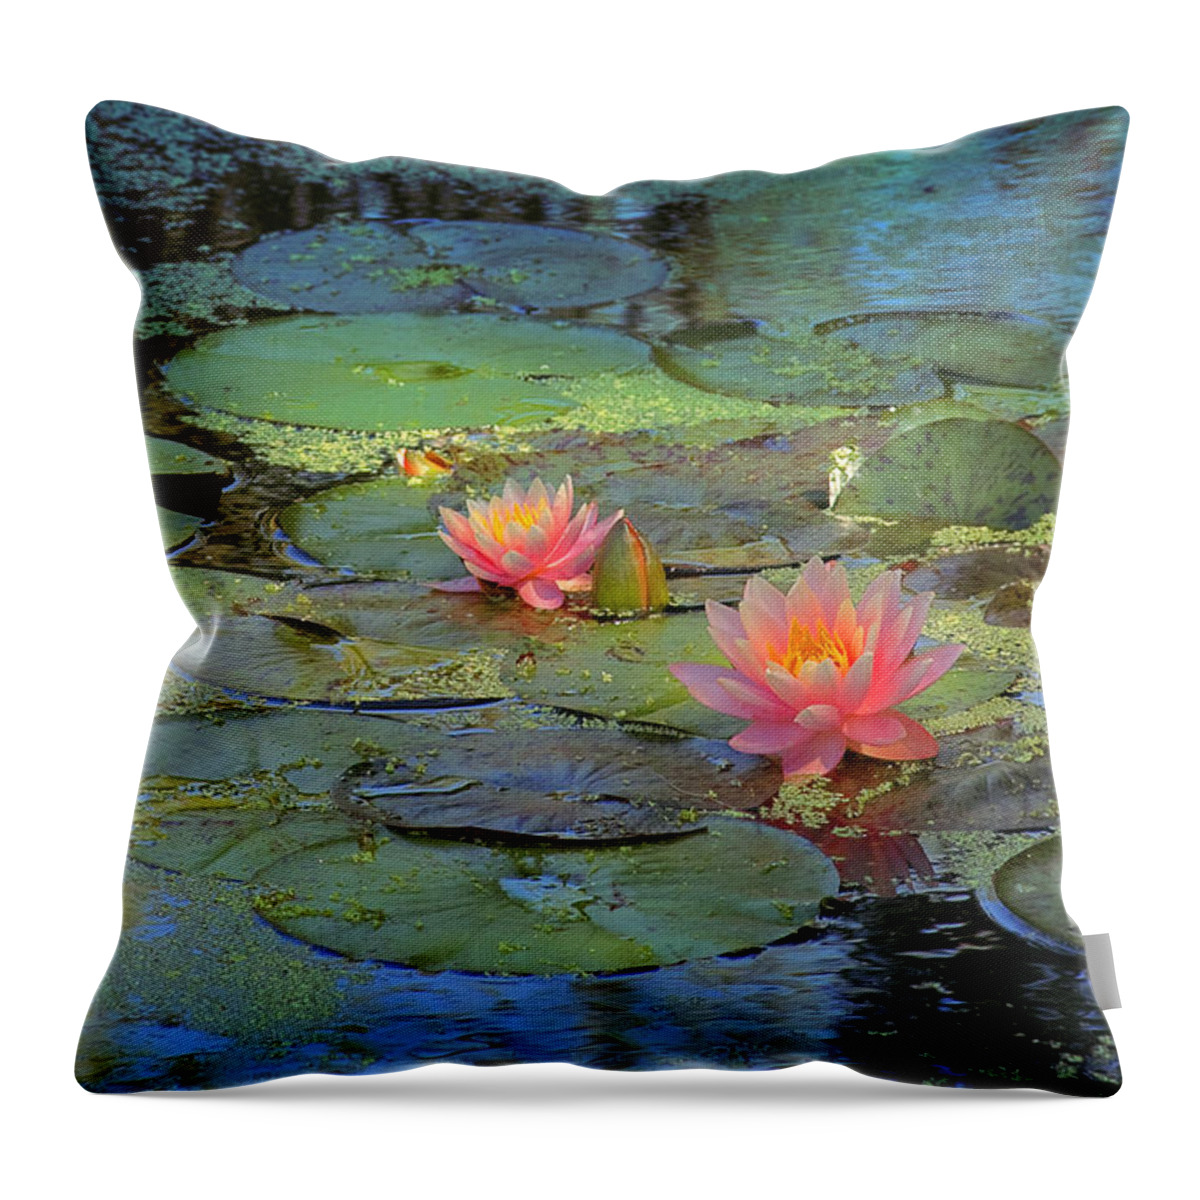 Pond Throw Pillow featuring the digital art Frog Creek by Kathy Besthorn